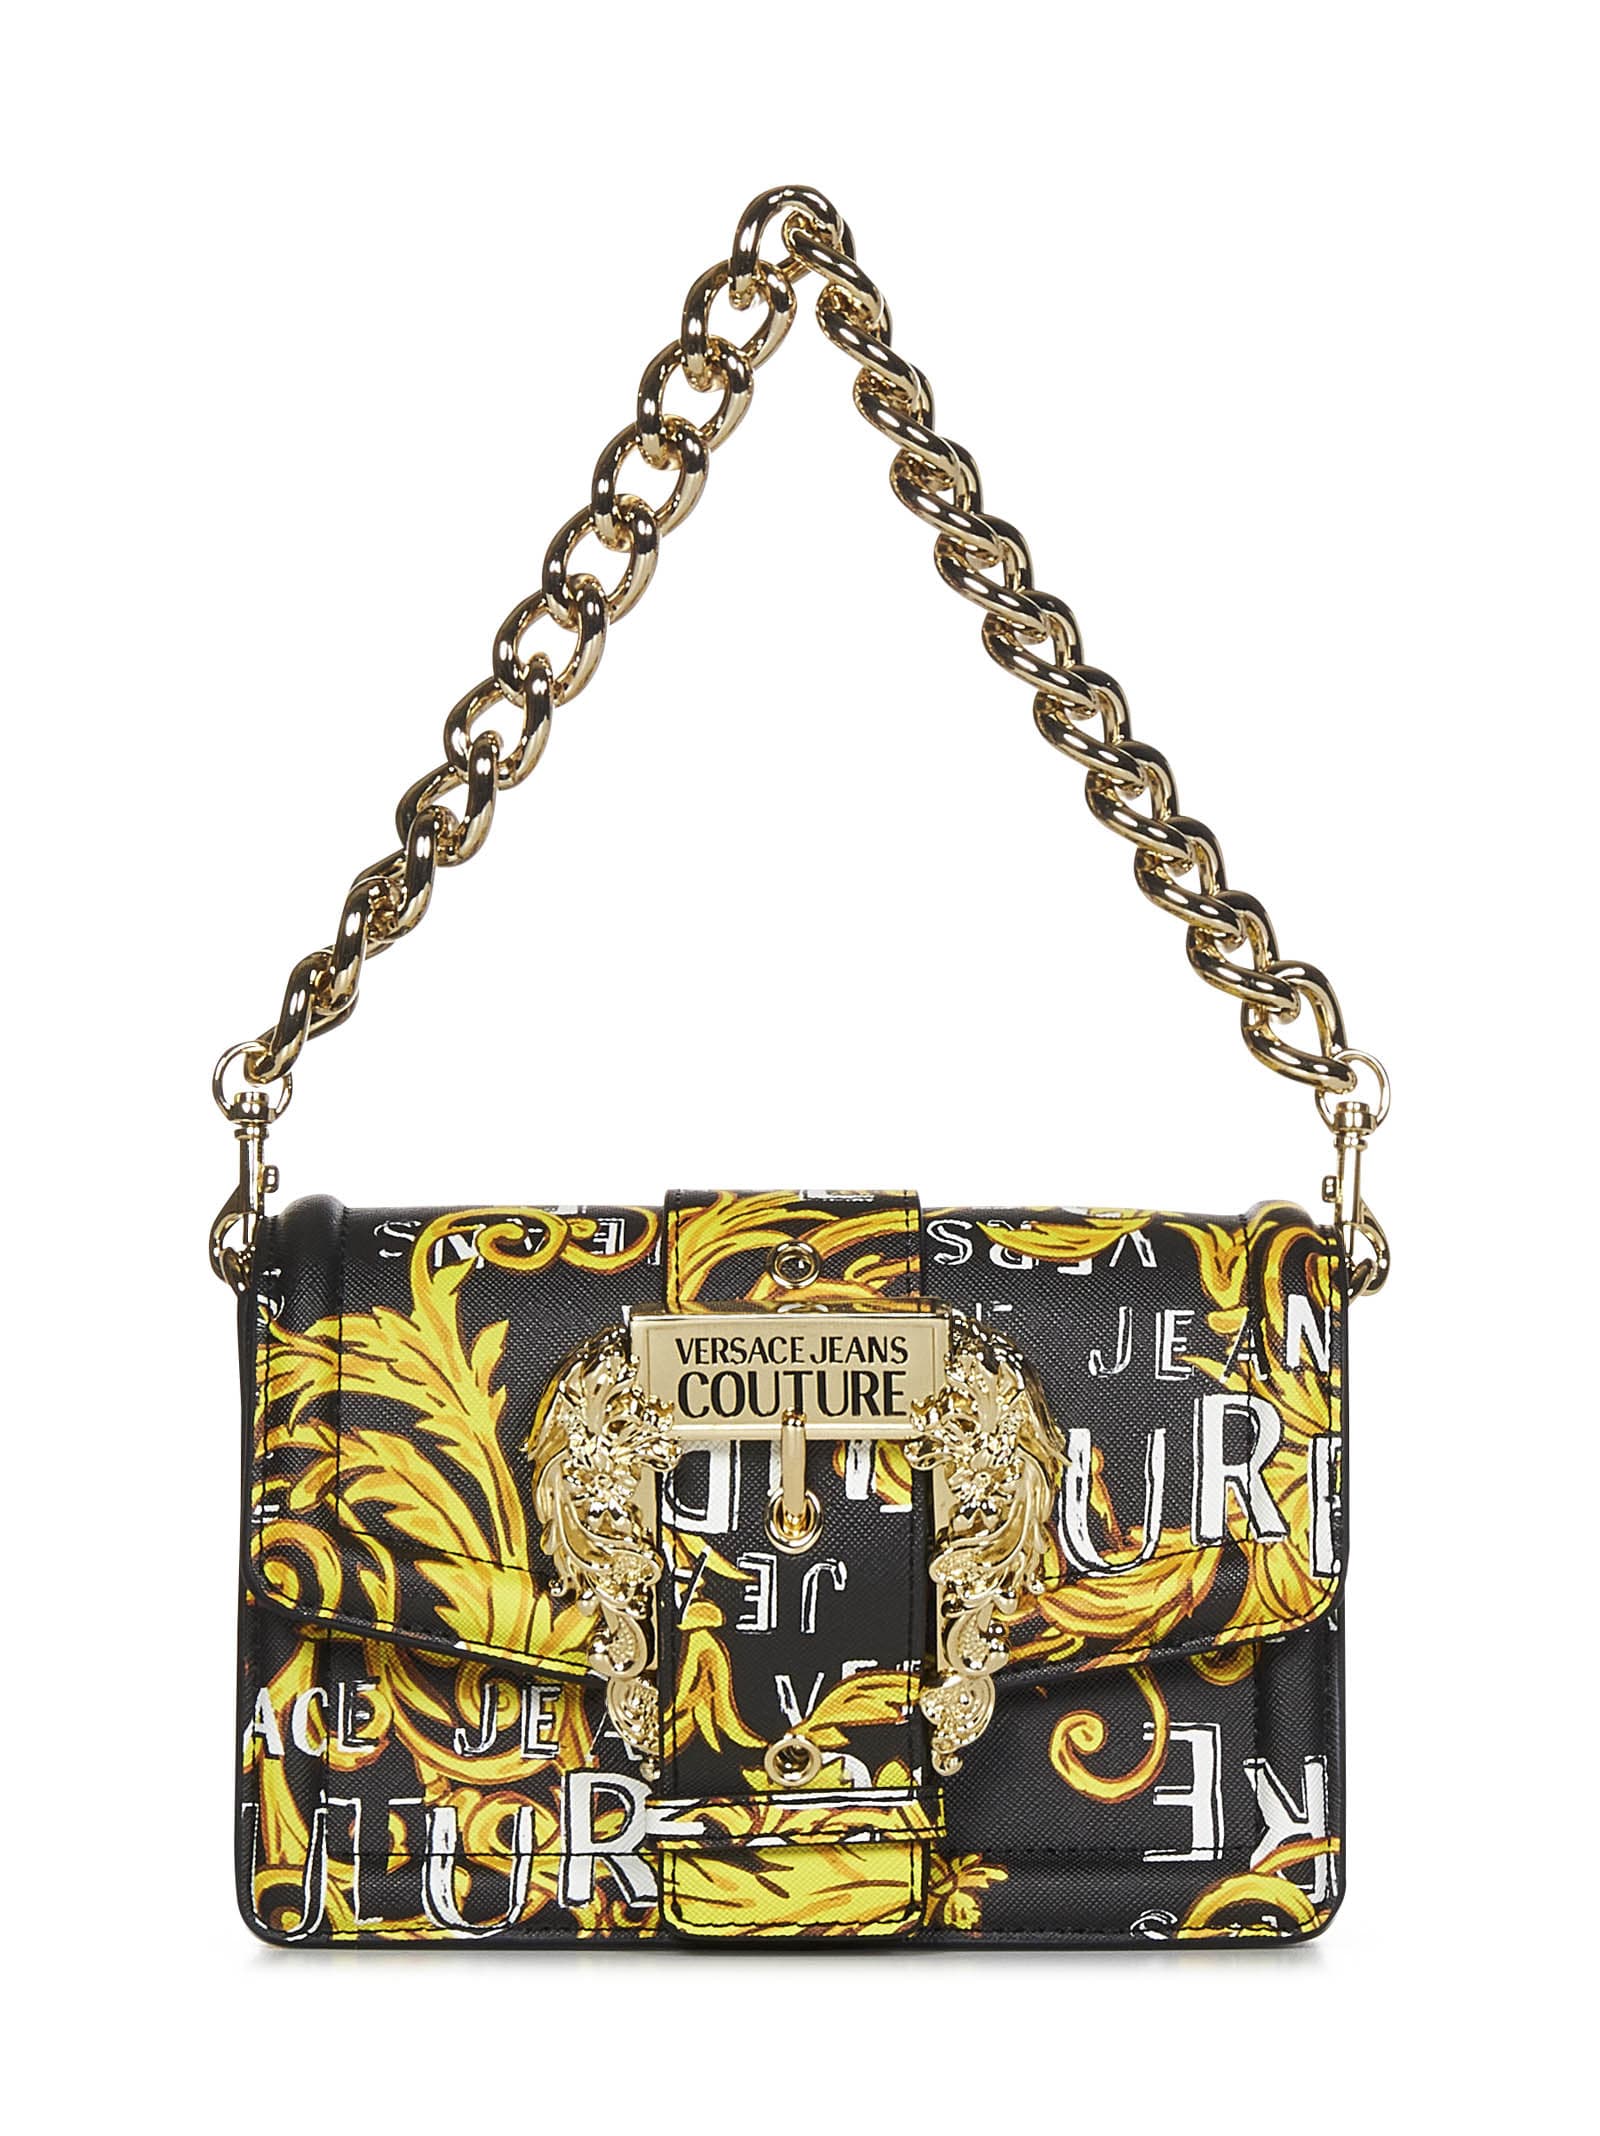 Handbags Versace Jeans Couture , Style code: 74va4bf6-zs597-g89